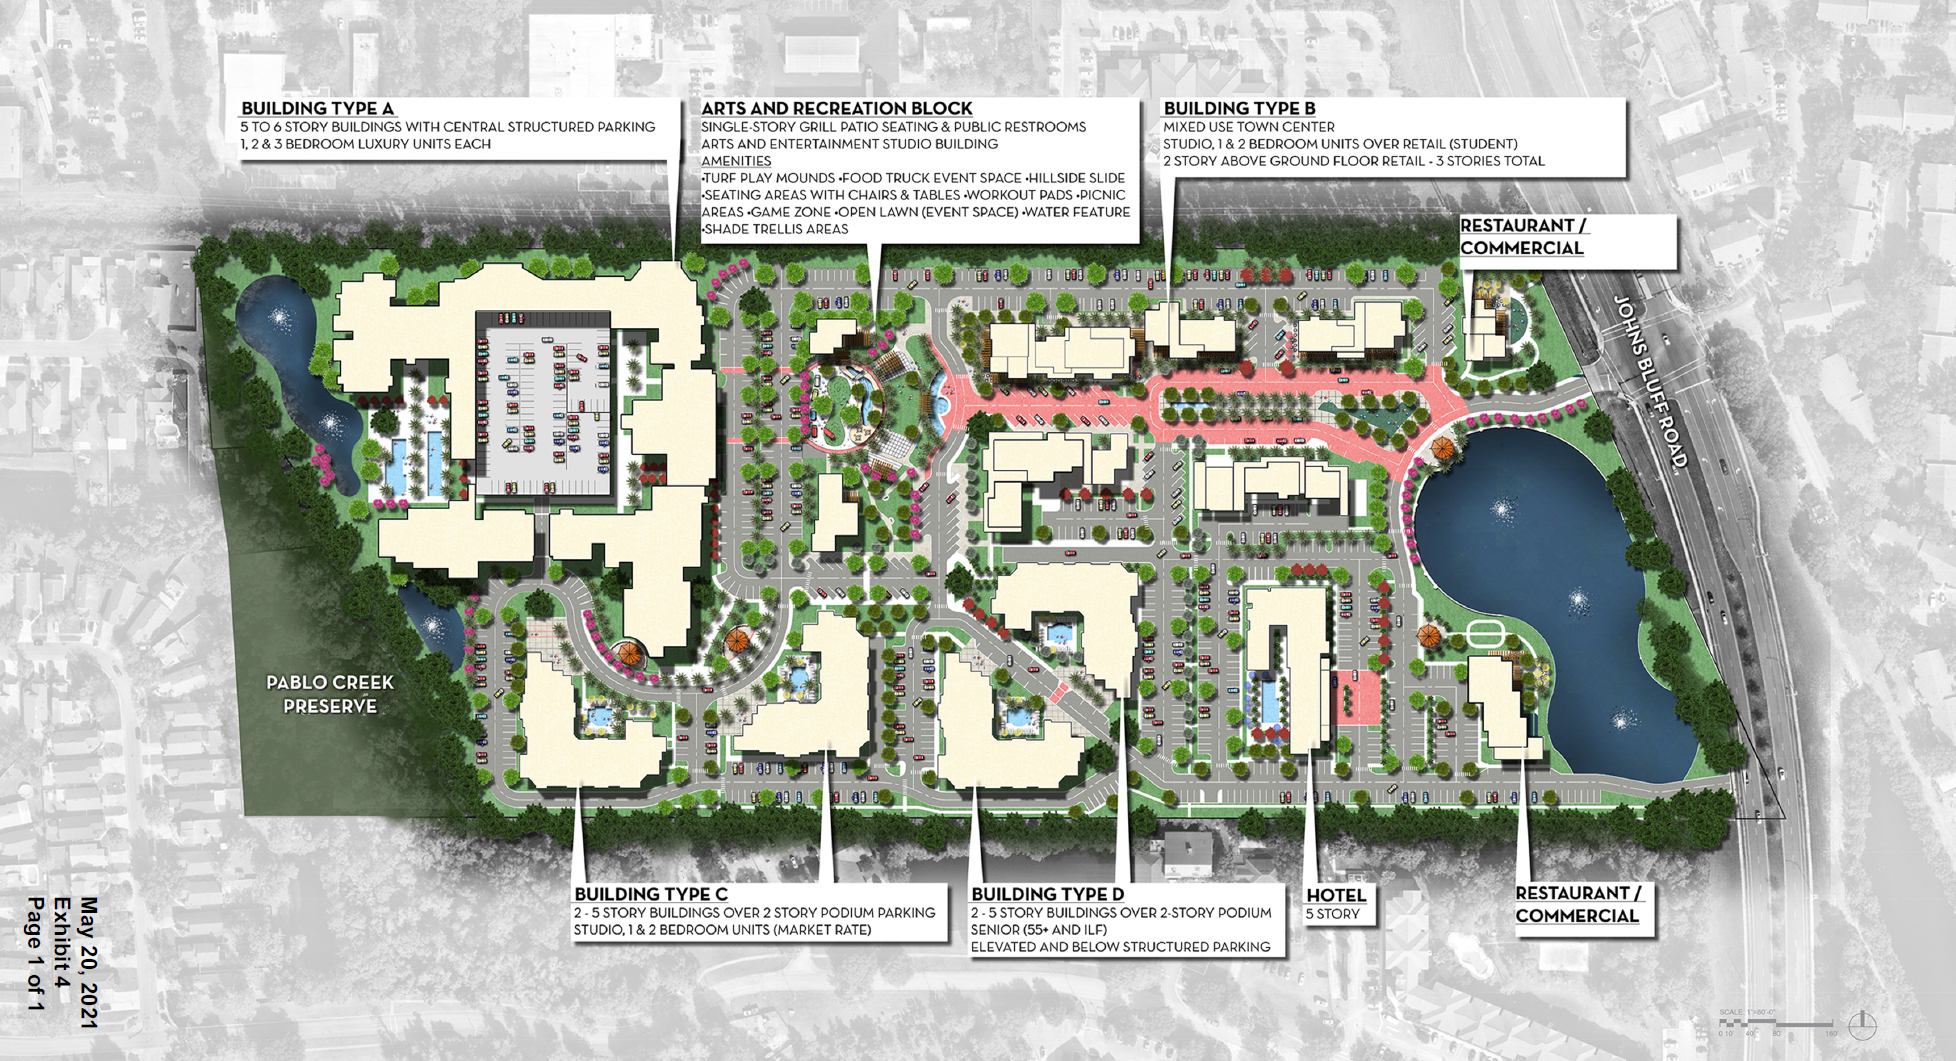 A conceptual site plan for The Village at Town Center.